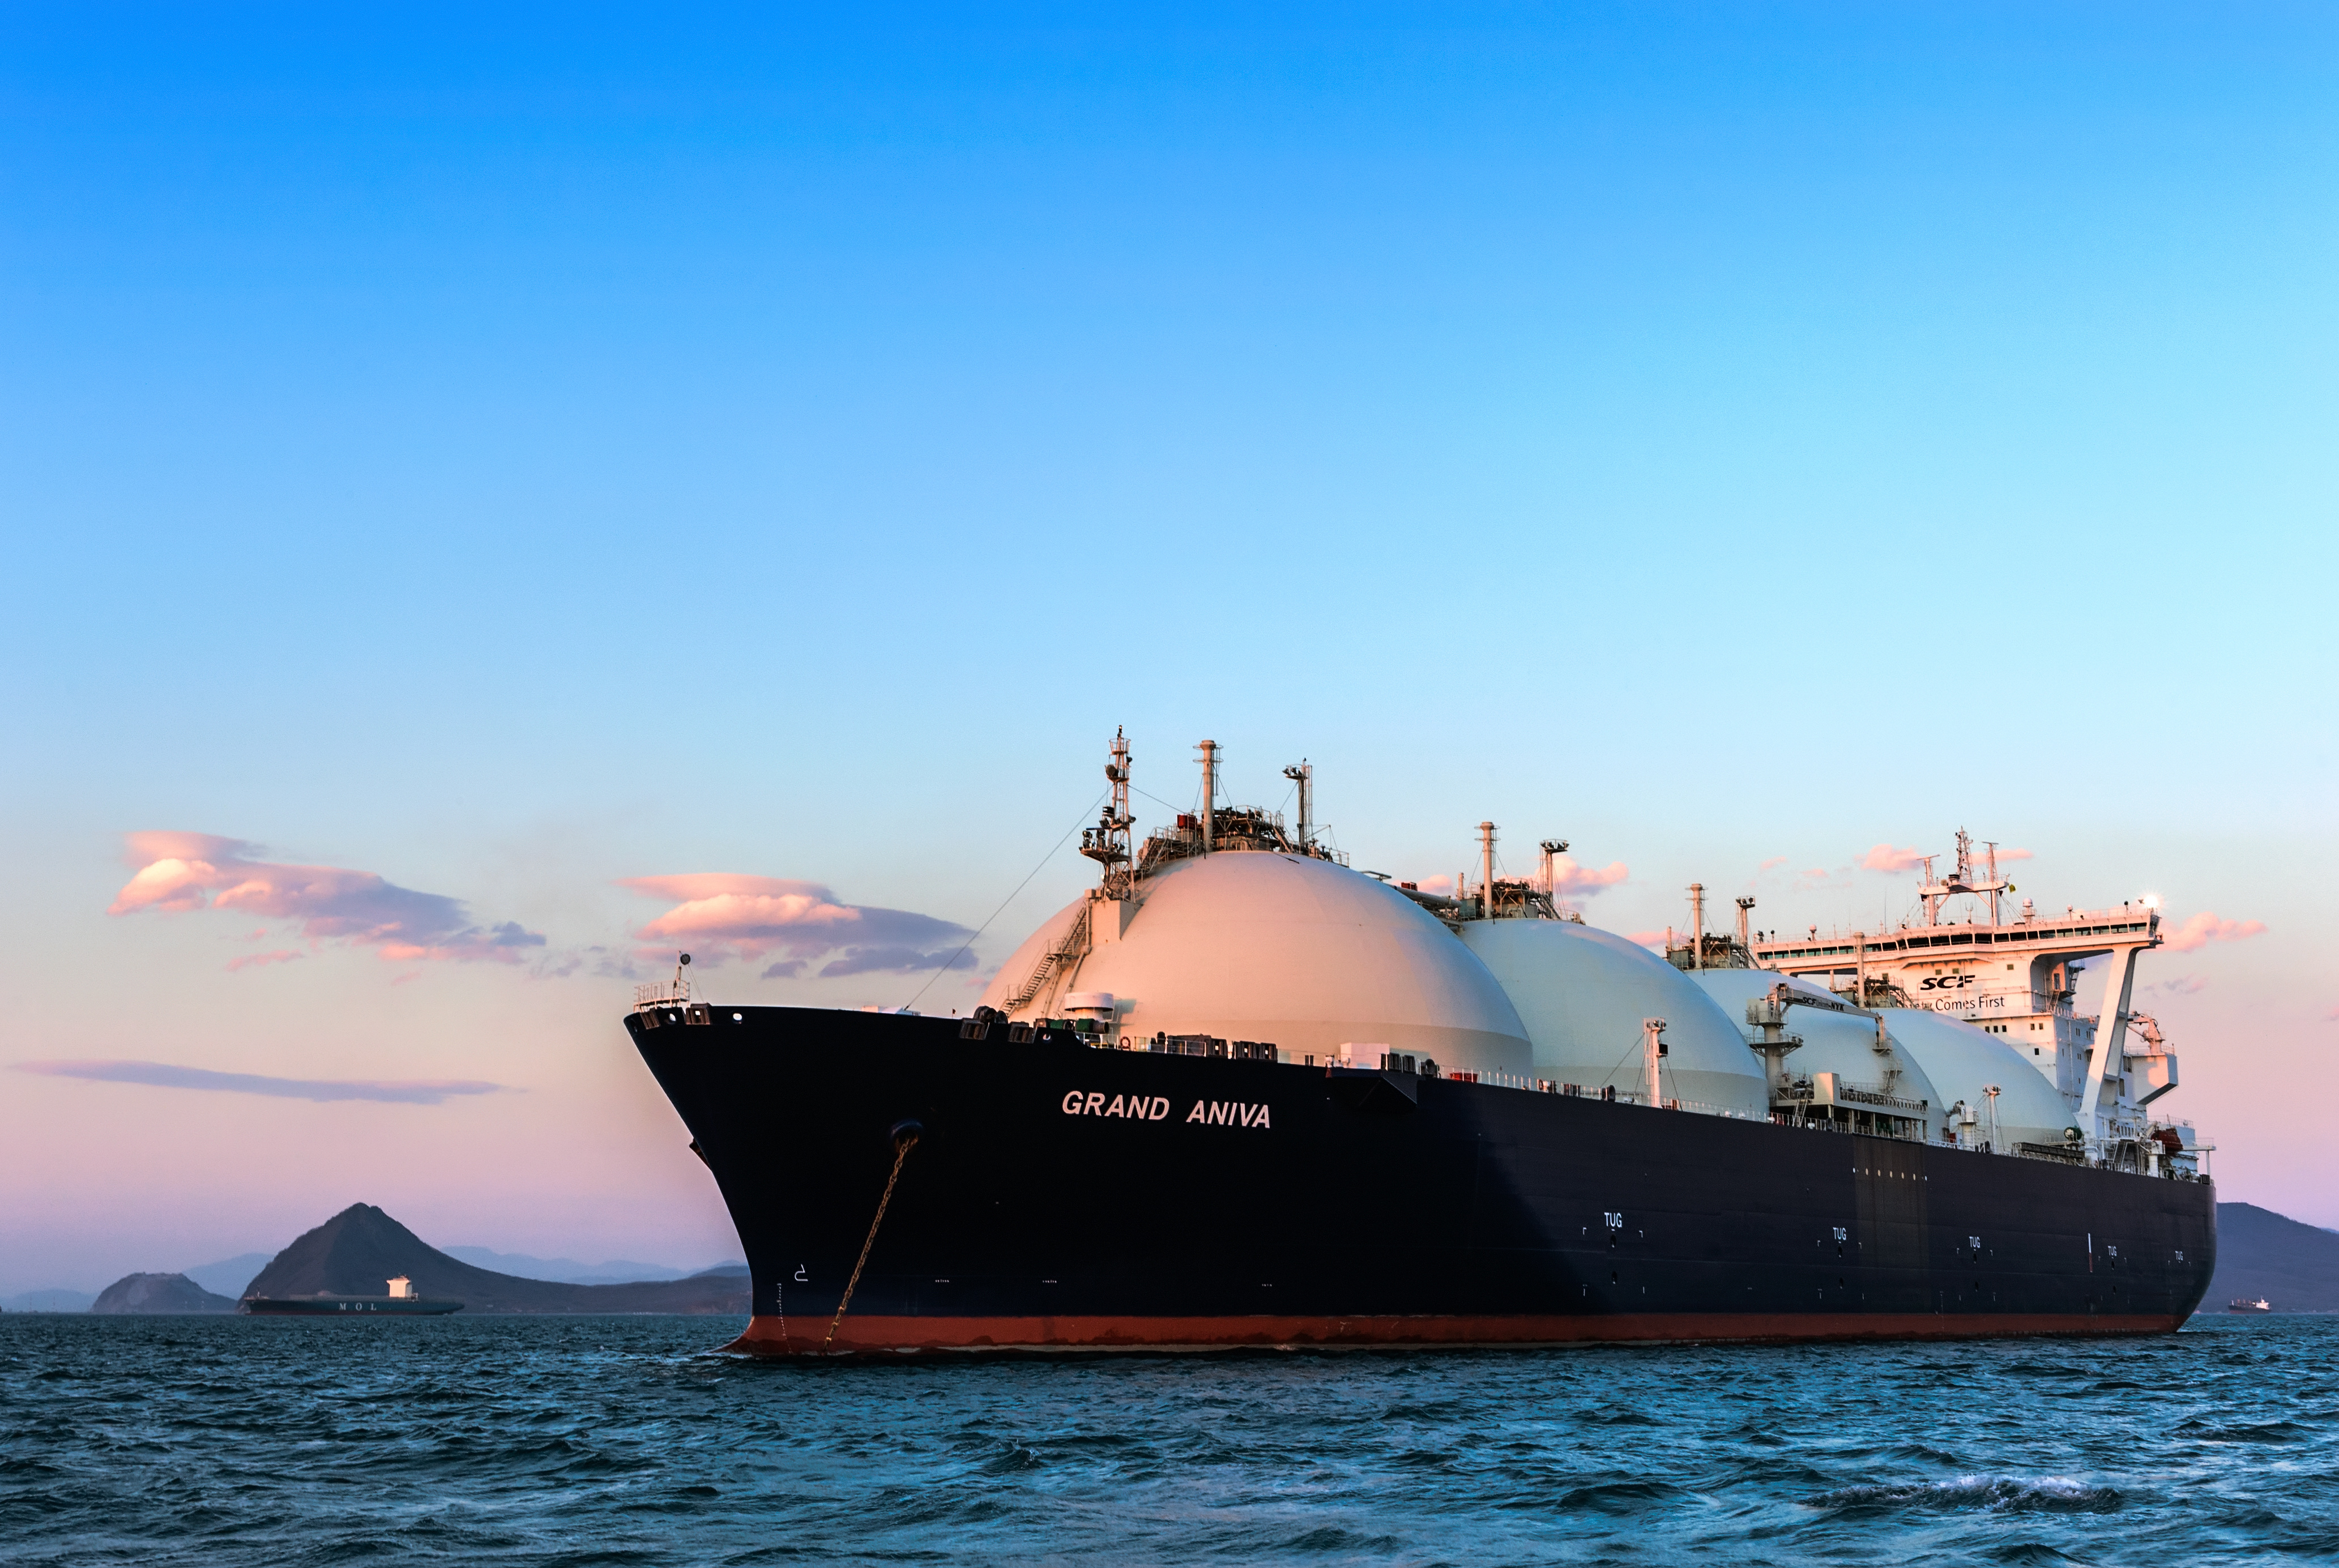 LNG Carrier Grand Aniva At Sunset On The Roads Of The Port Of Nakhodka